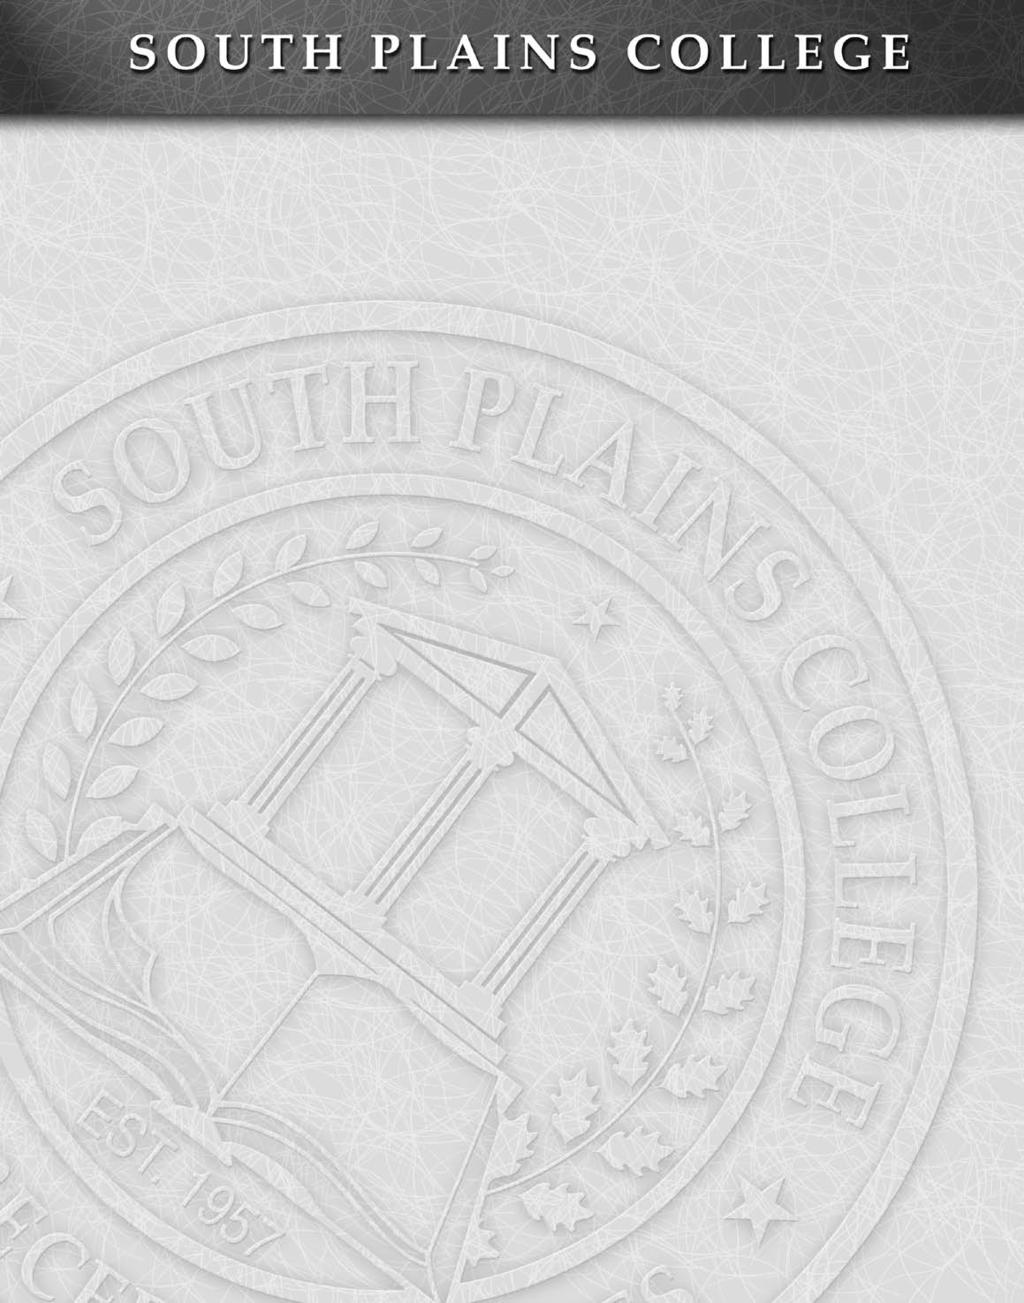 2003-2004 Performance Report South Plains College 1 Institutional Effectiveness Performance Report 2003-2004 SOUTH